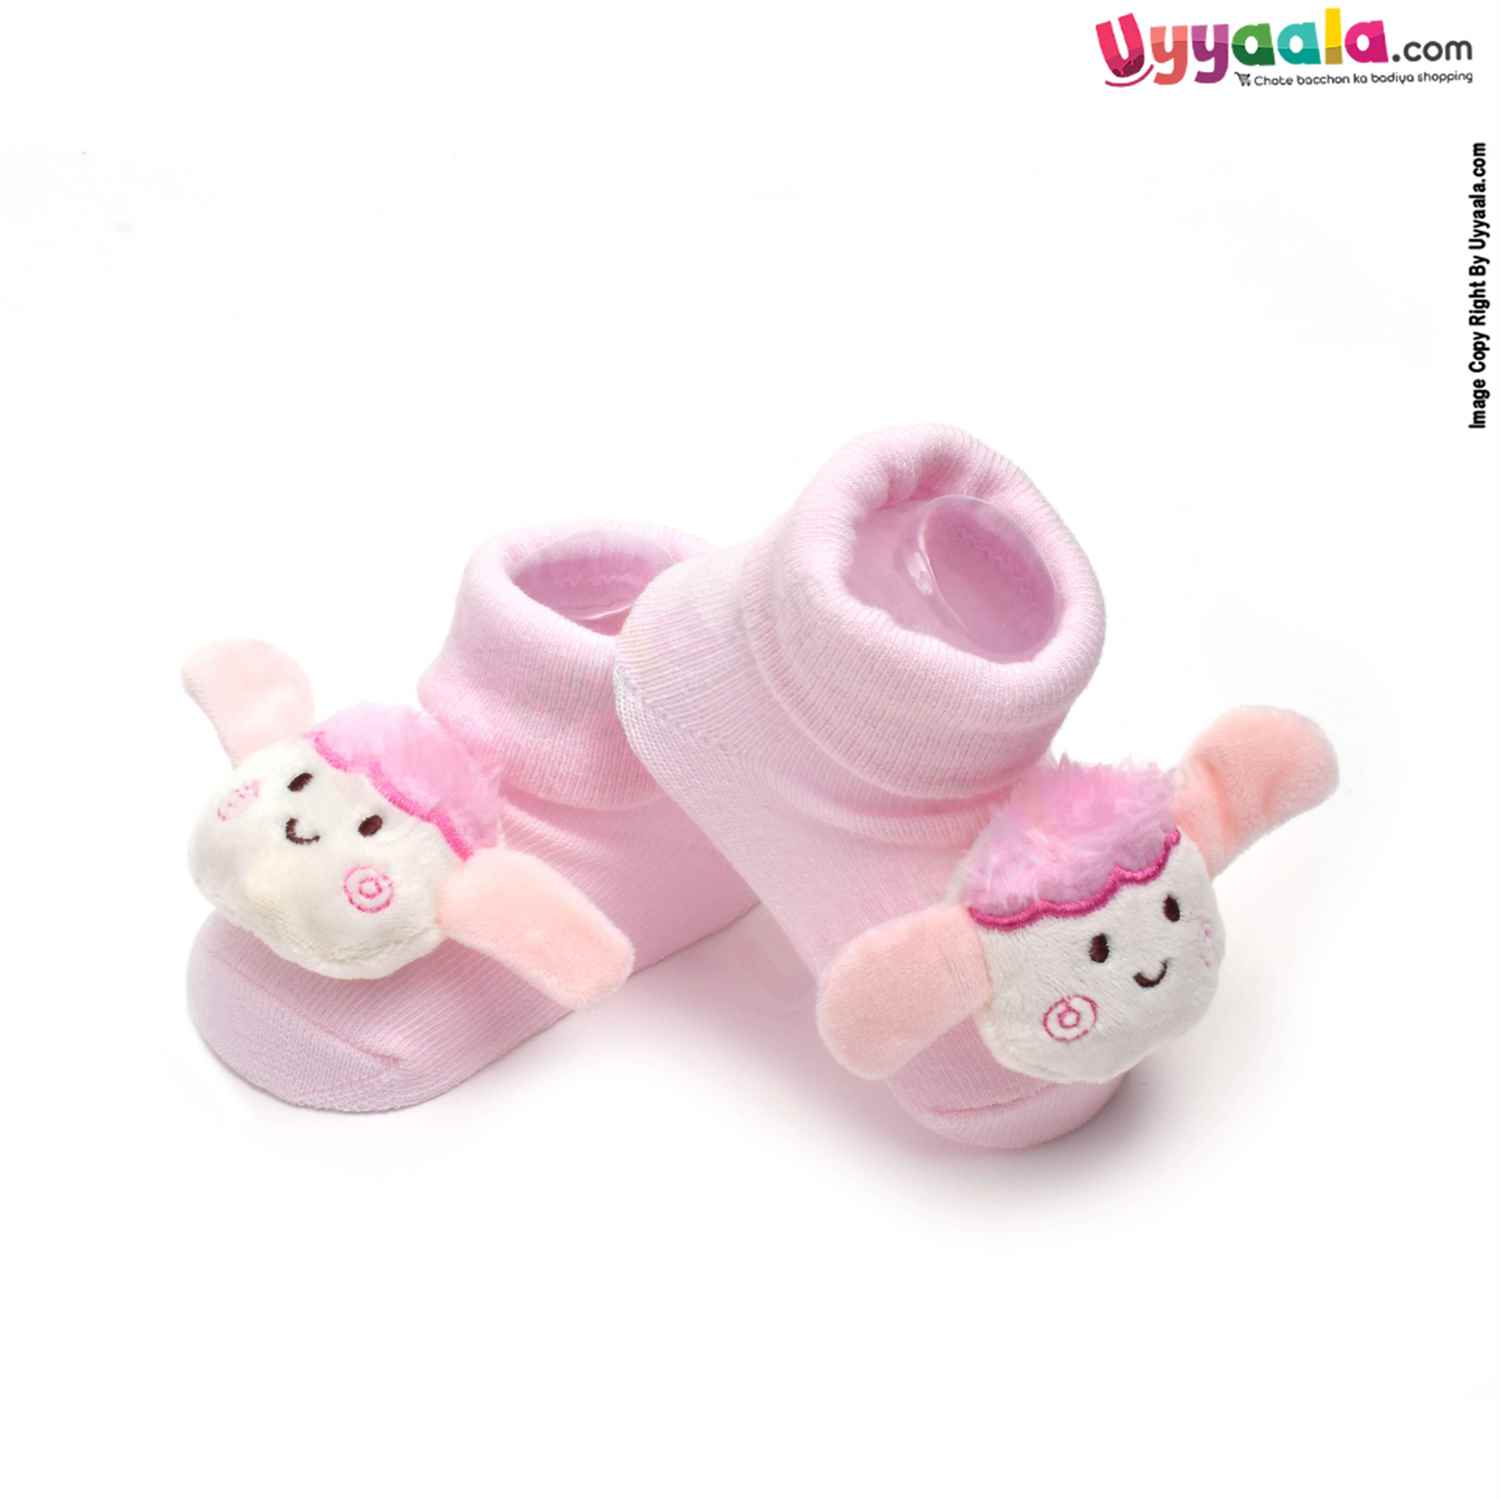 Hosiery Cotton Baby Socks with Cartoon Character ,0 to 12m Age- Pink